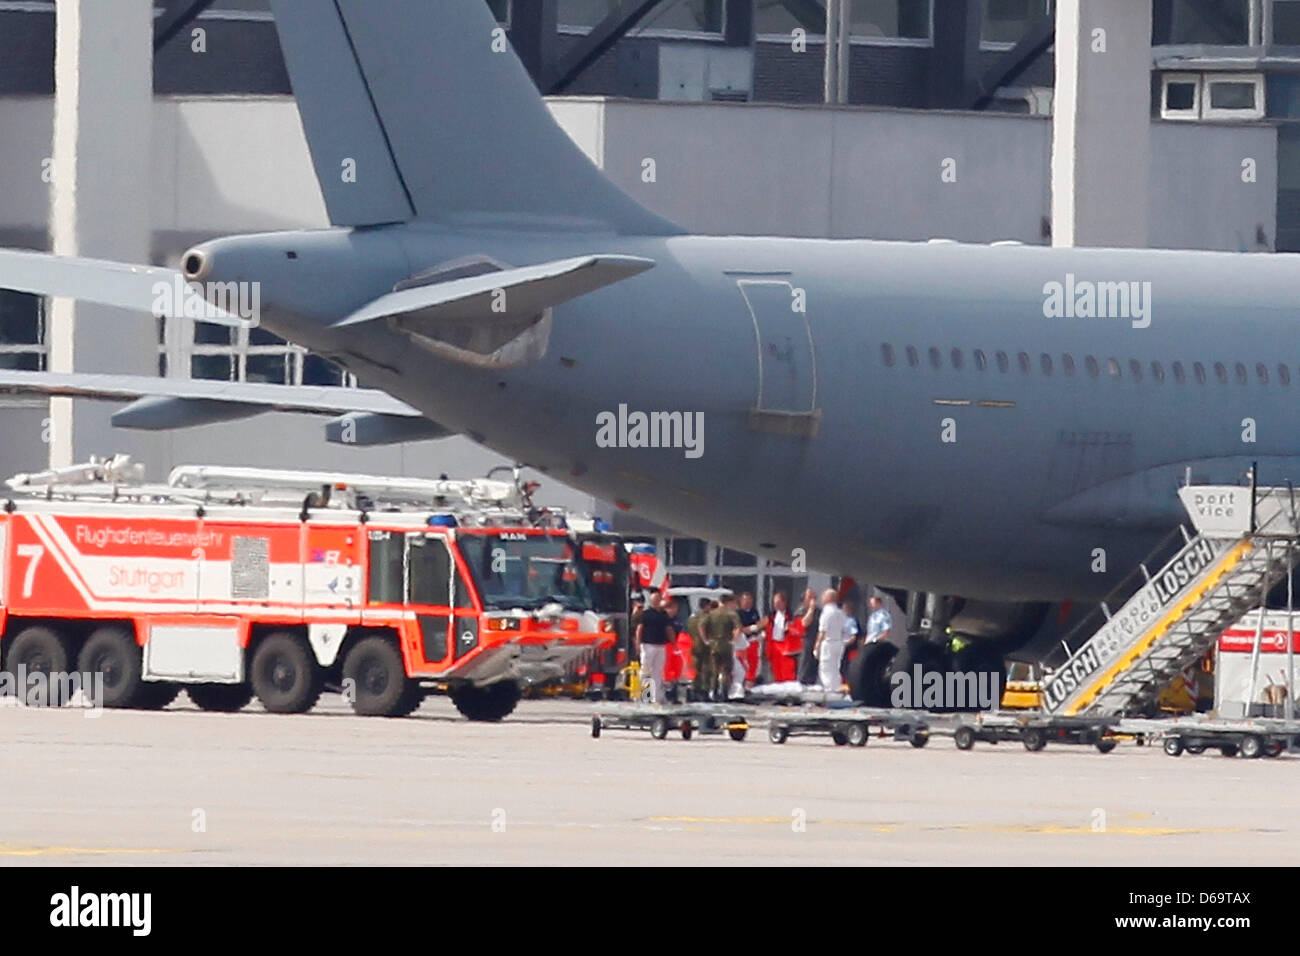 A German Army Airbus is parked at the airport in Stuttgart, Germany, 15 April 2013. Critically injured victims of the civil war in Syria were transported out of Amman, Jordan, where they were being treated, for further treatment in Germany on the aircraft. Photo: THOMAS NIEDERMUELLER Stock Photo